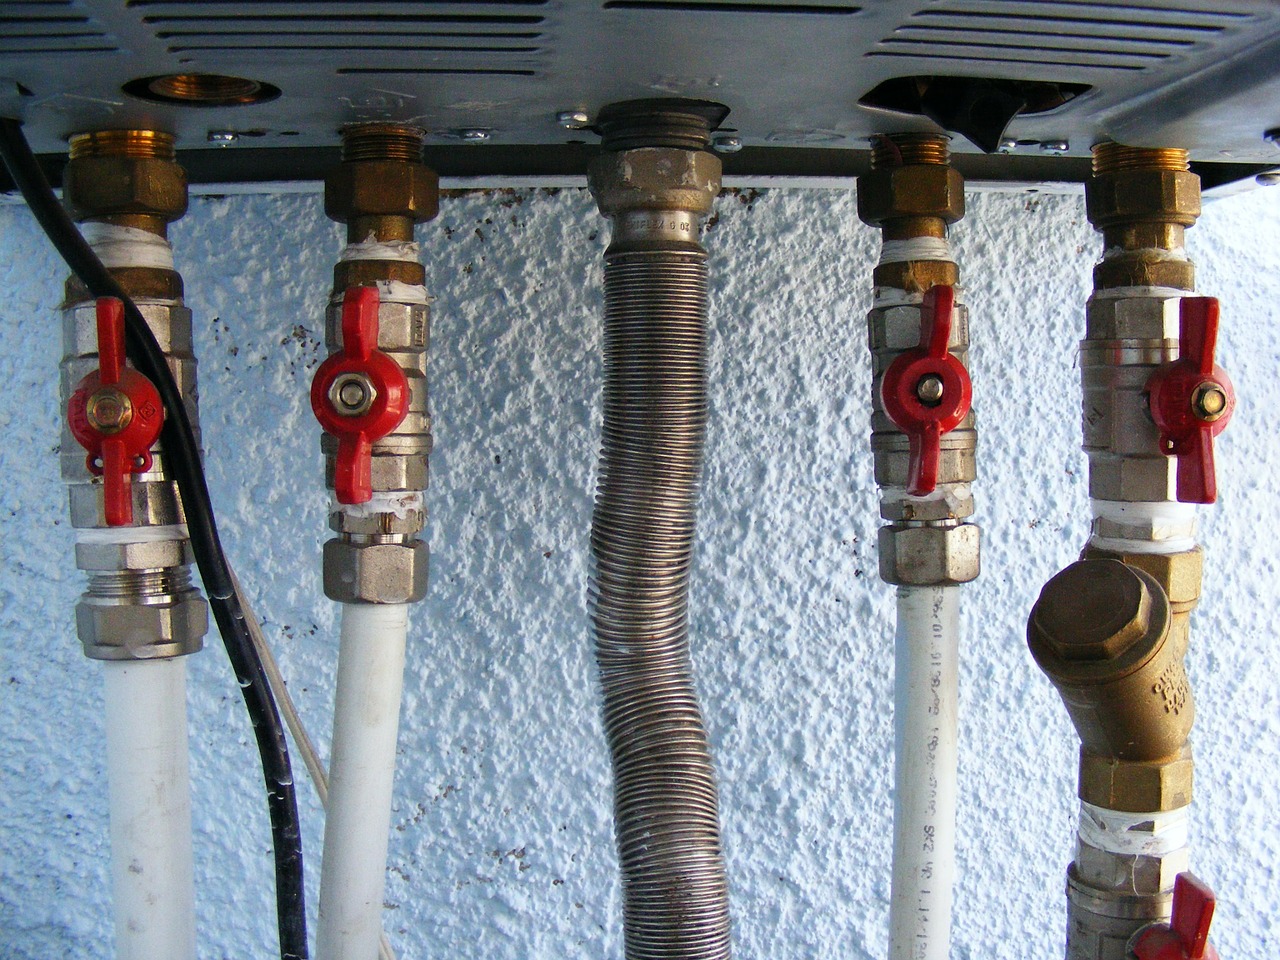 Stout zuiger Verrijking How To Drain A Central Heating System | JustBoilers.com